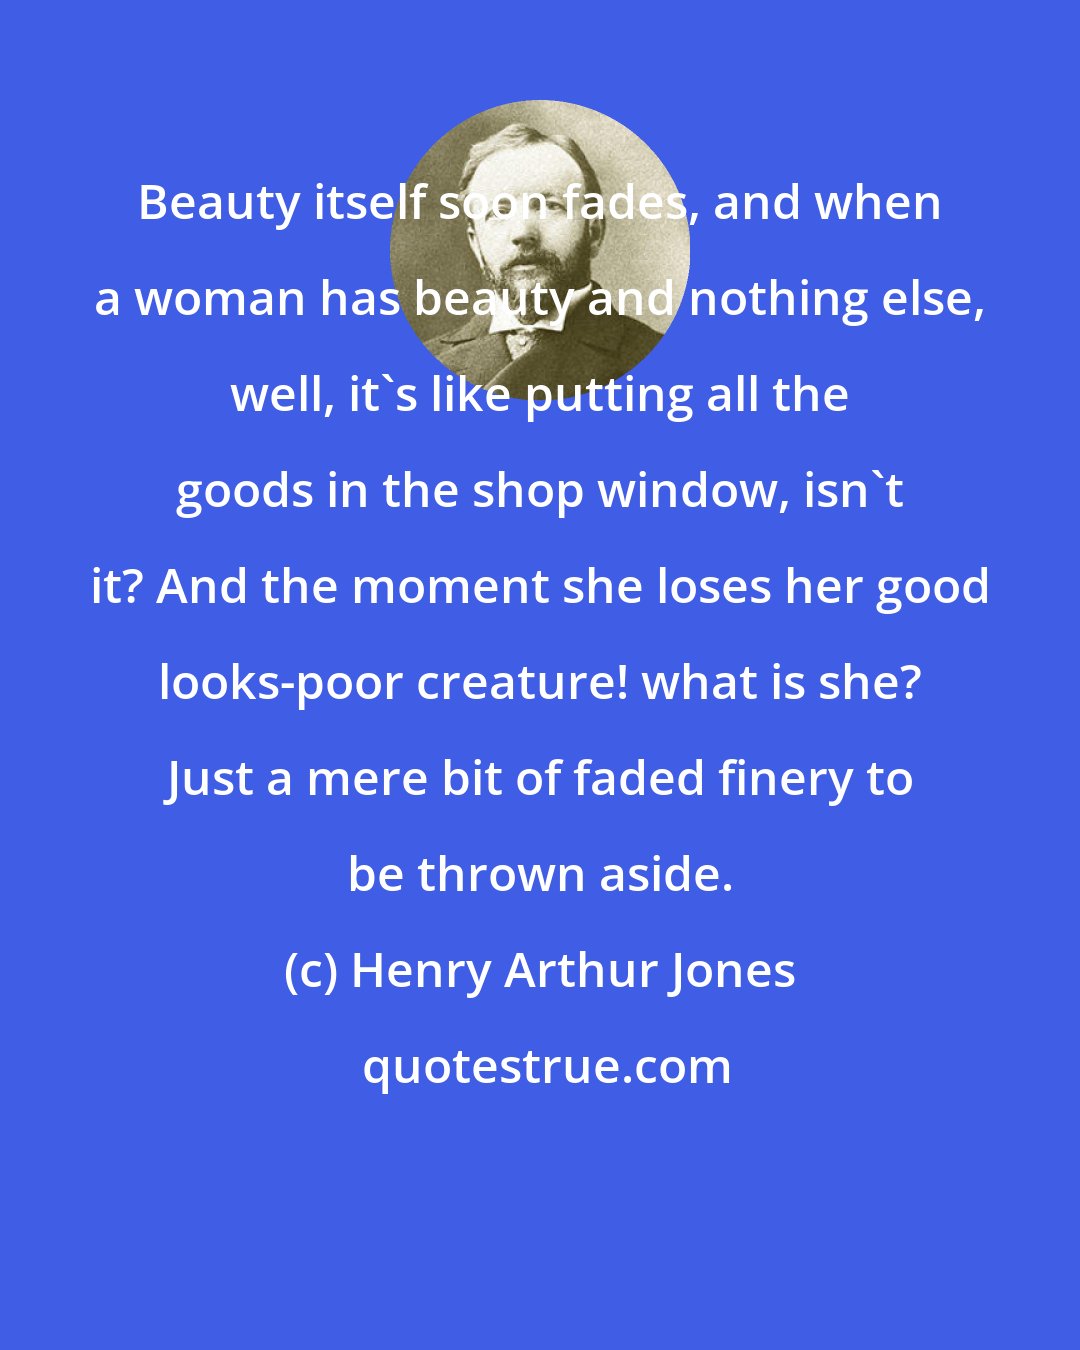 Henry Arthur Jones: Beauty itself soon fades, and when a woman has beauty and nothing else, well, it's like putting all the goods in the shop window, isn't it? And the moment she loses her good looks-poor creature! what is she? Just a mere bit of faded finery to be thrown aside.